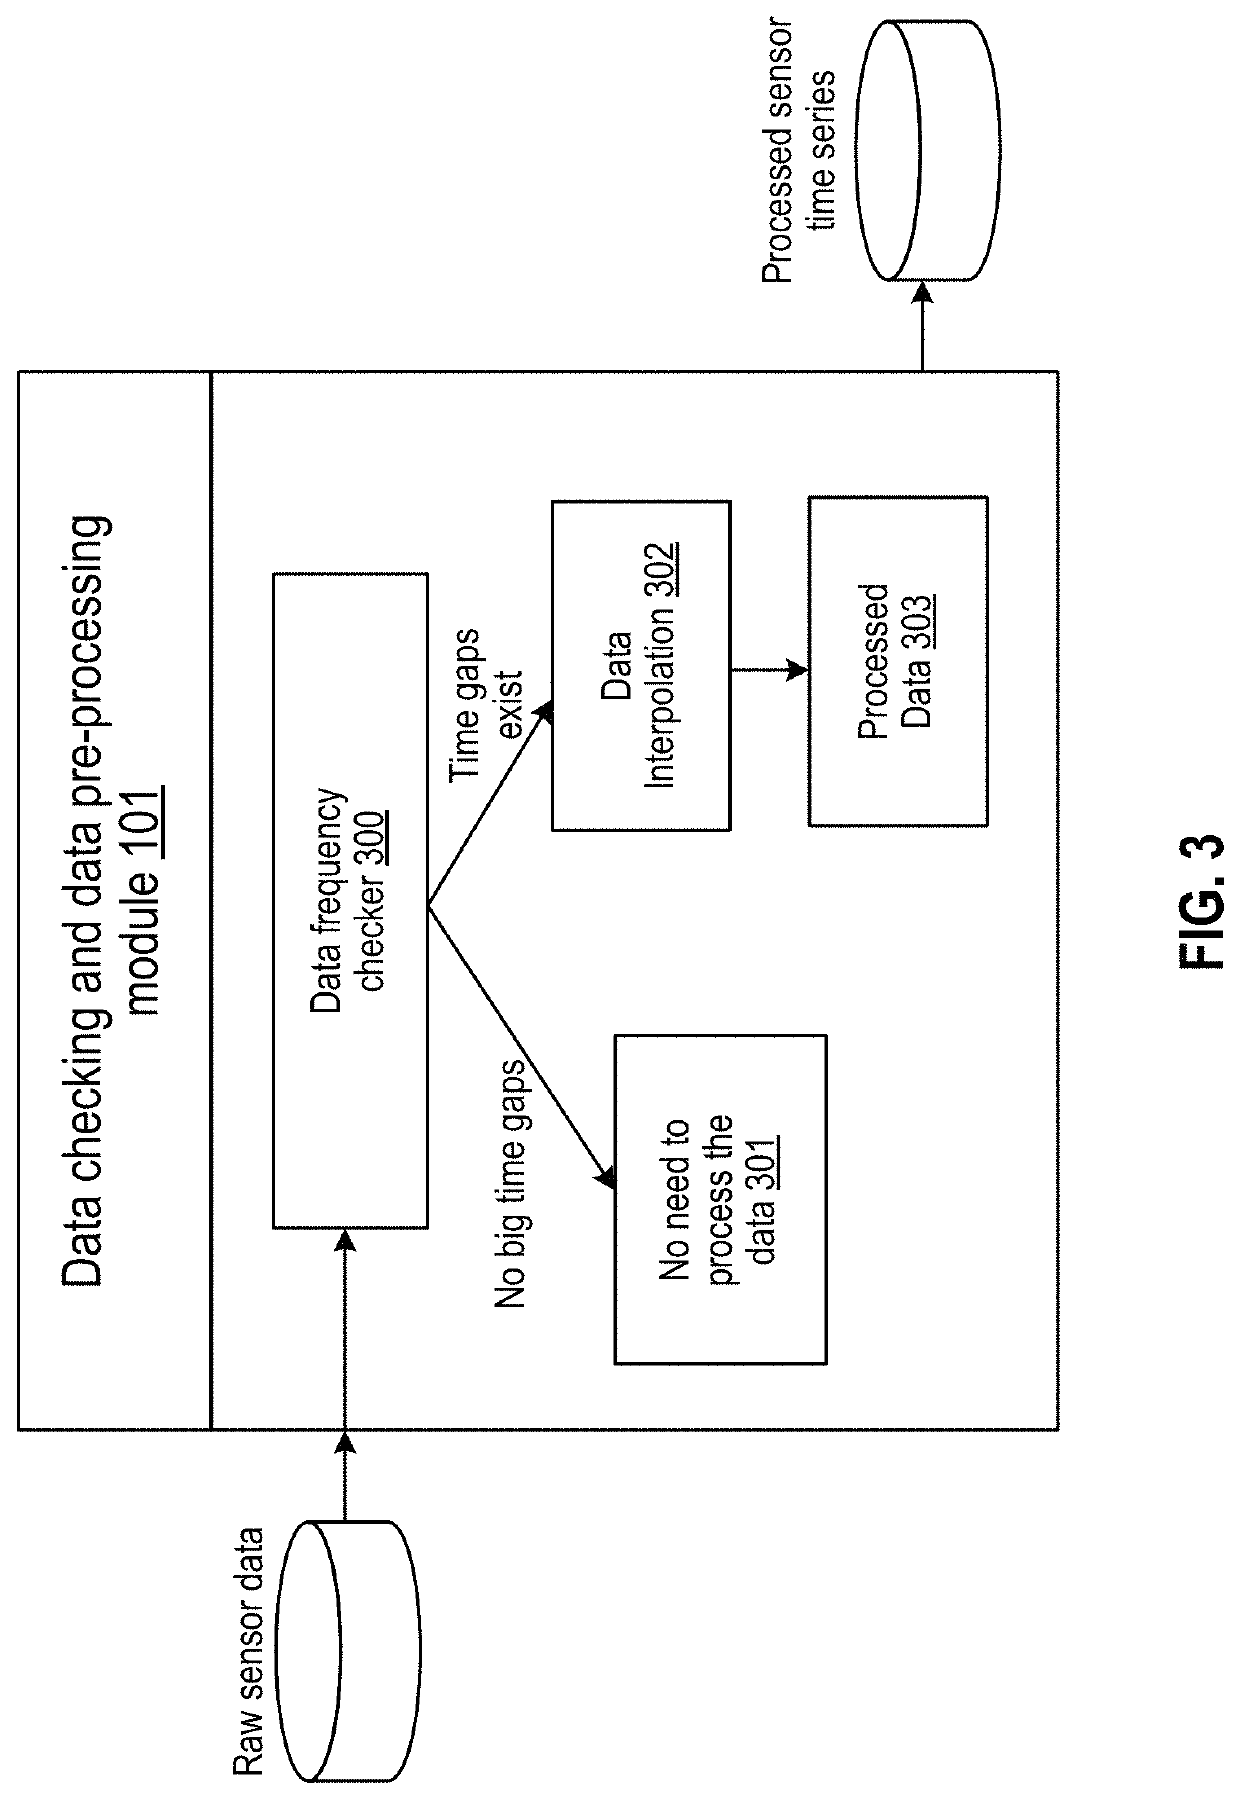 Predictive maintenance system for spatially correlated industrial equipment